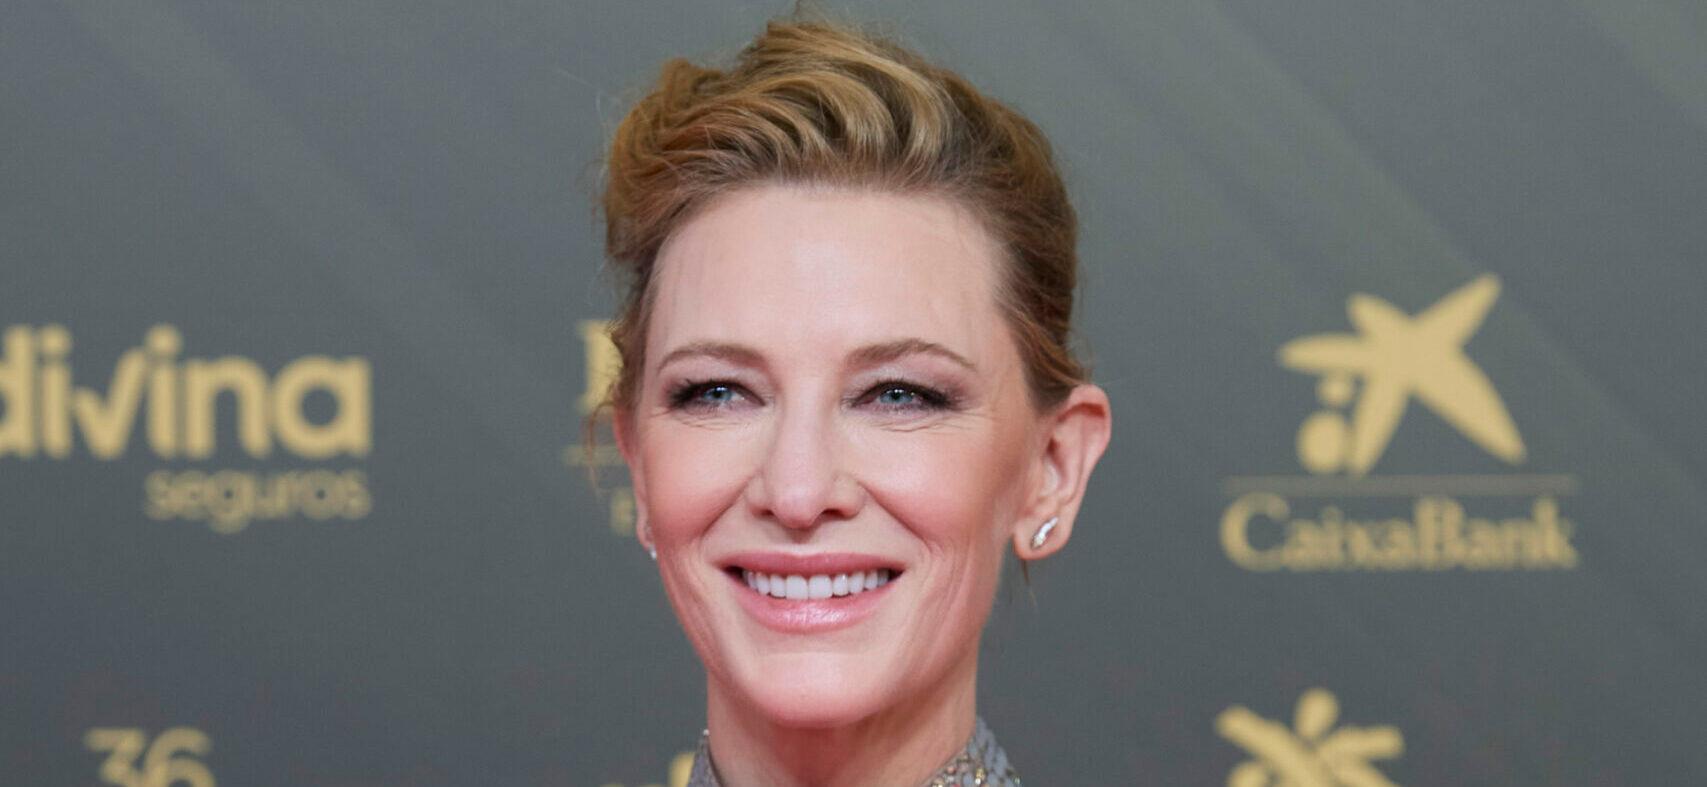 36th Goya Awards - Red Carpet at Palau de les Arts Reina Sofia on February 12, 2022 in Valencia, Spain. 12 Feb 2022 Pictured: Cate Blanchett.